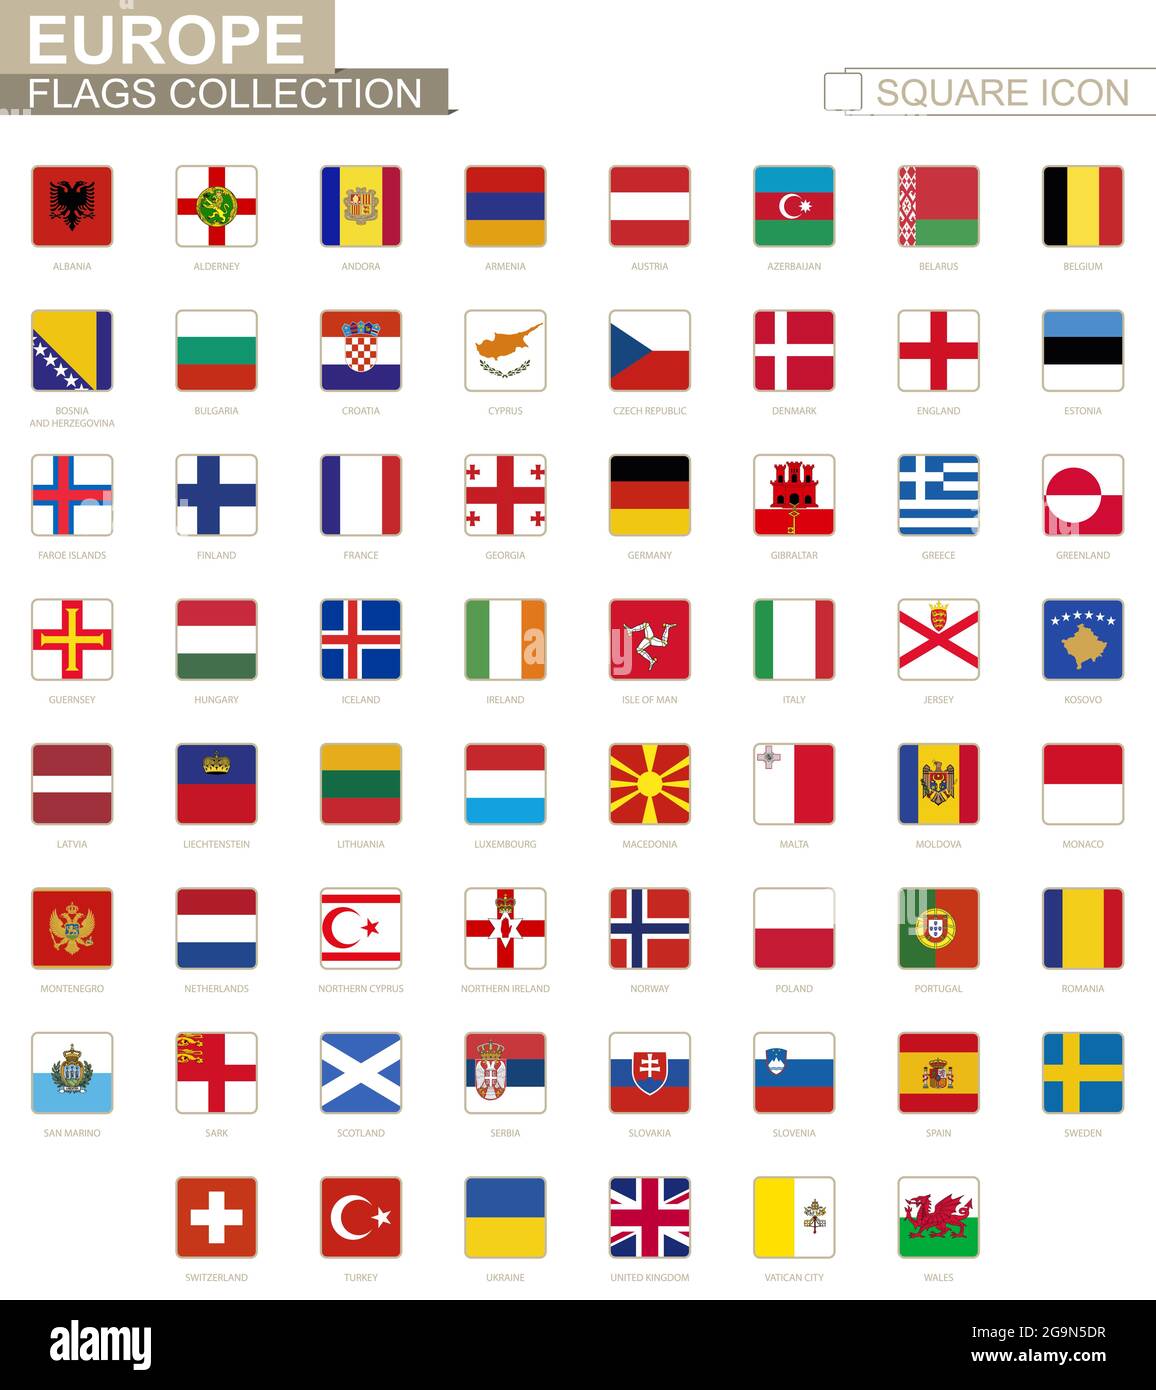 Square flags of Europe. From Albania to Wales. Vector Illustration. Stock Vector